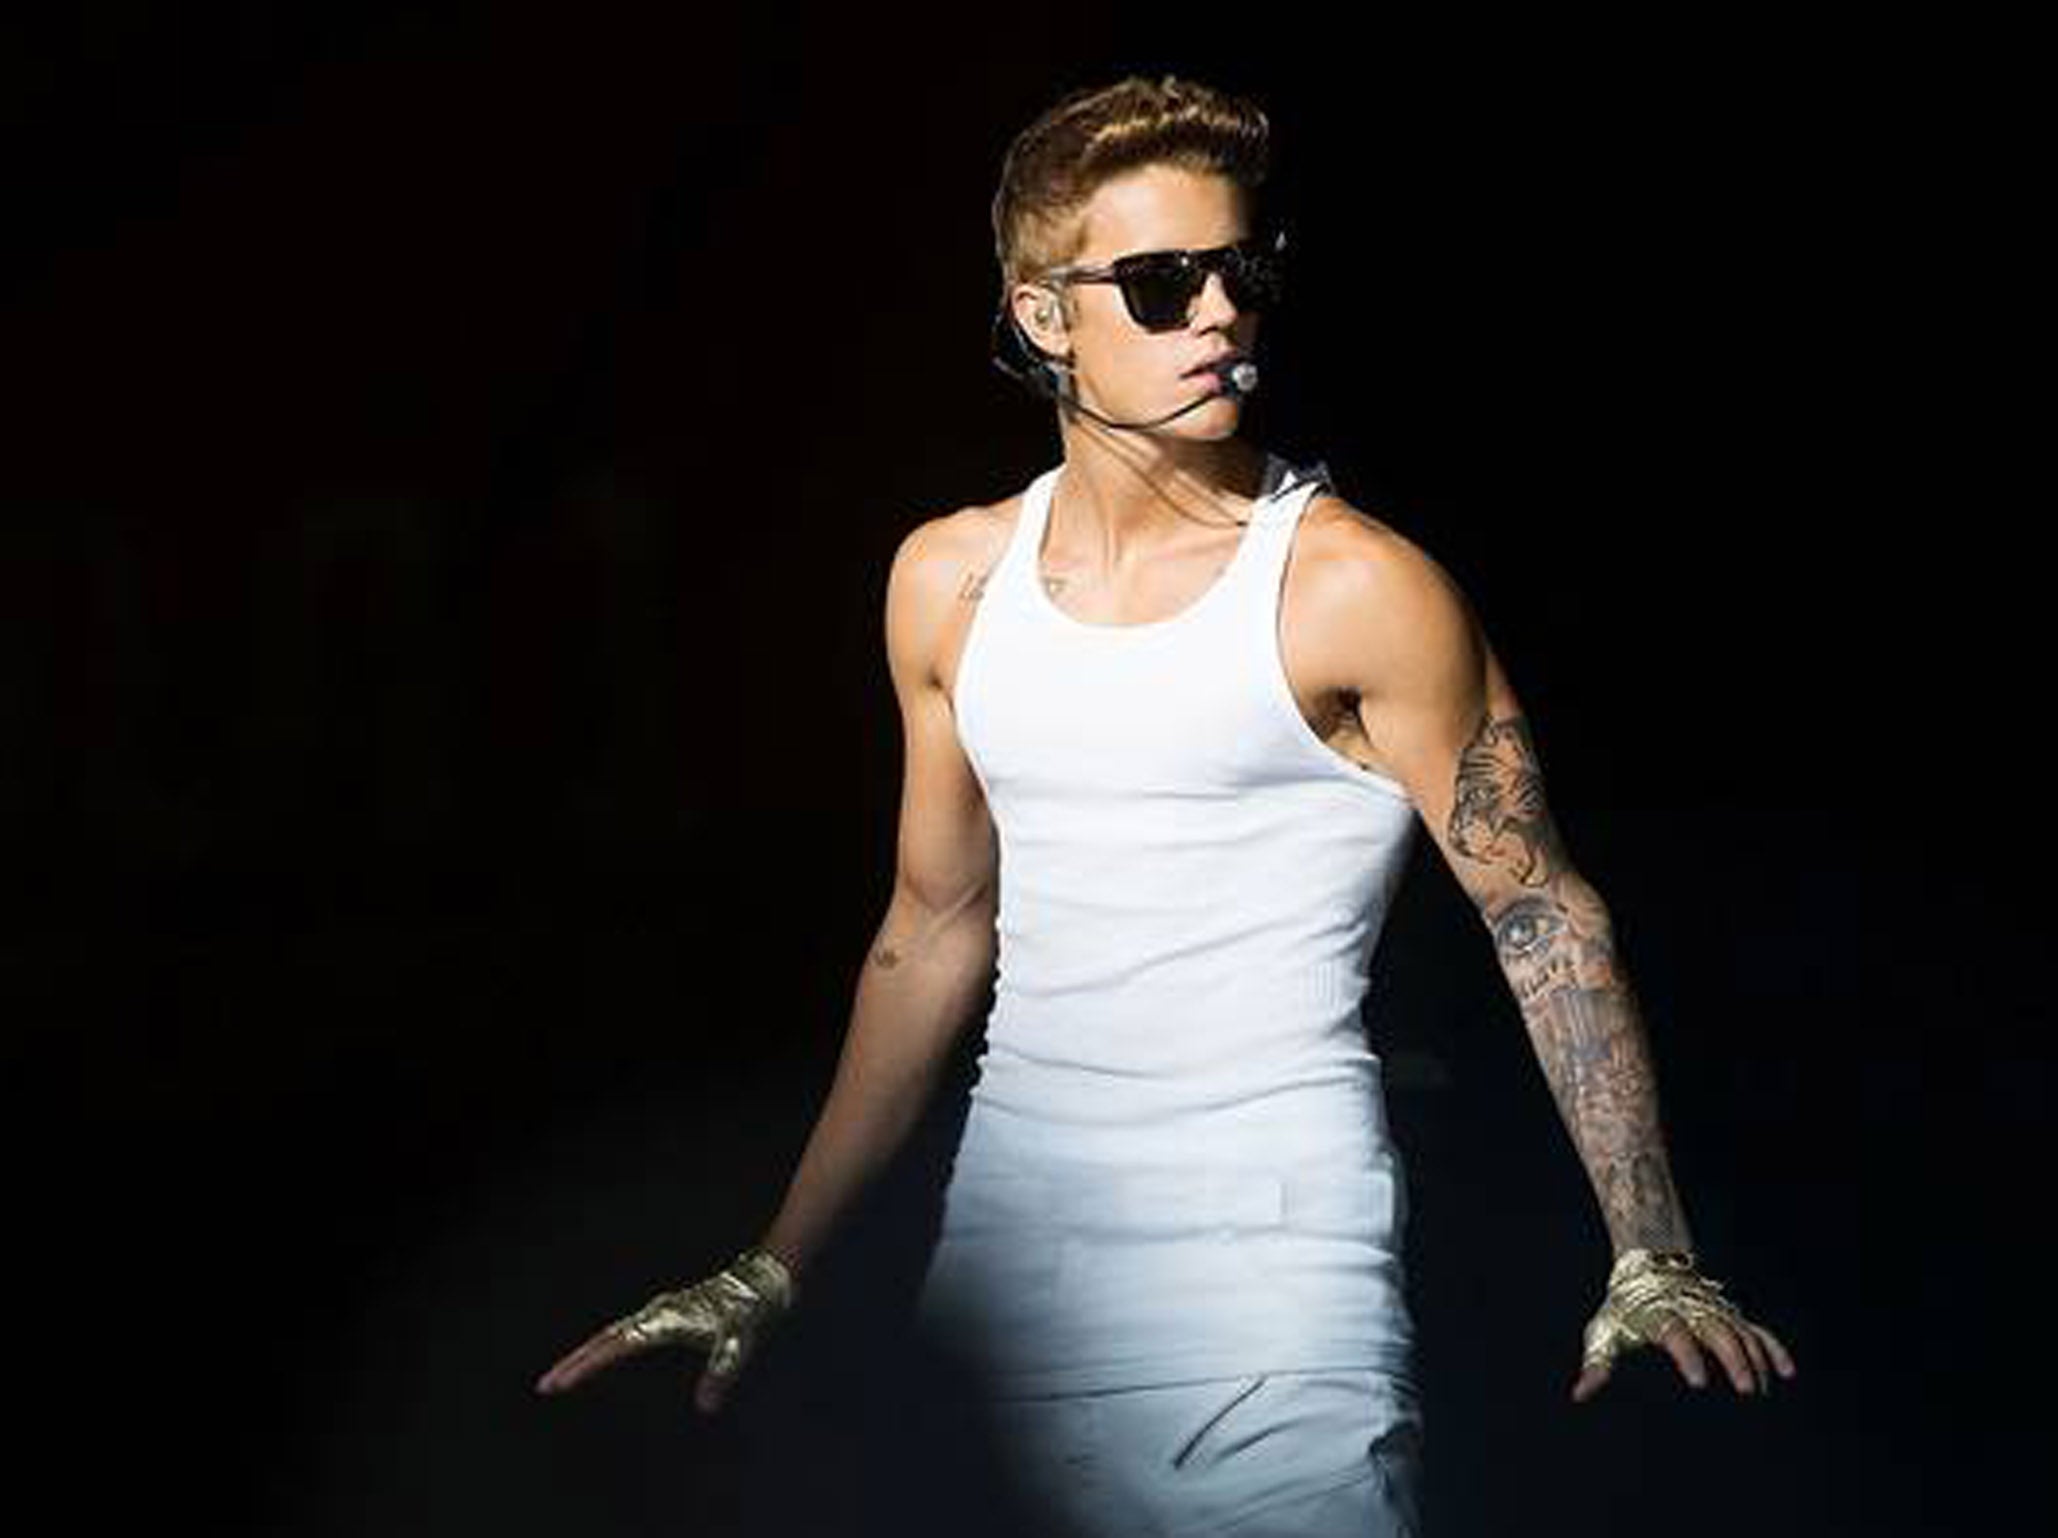 Justin Bieber shocked fans by announcing his plans to retire